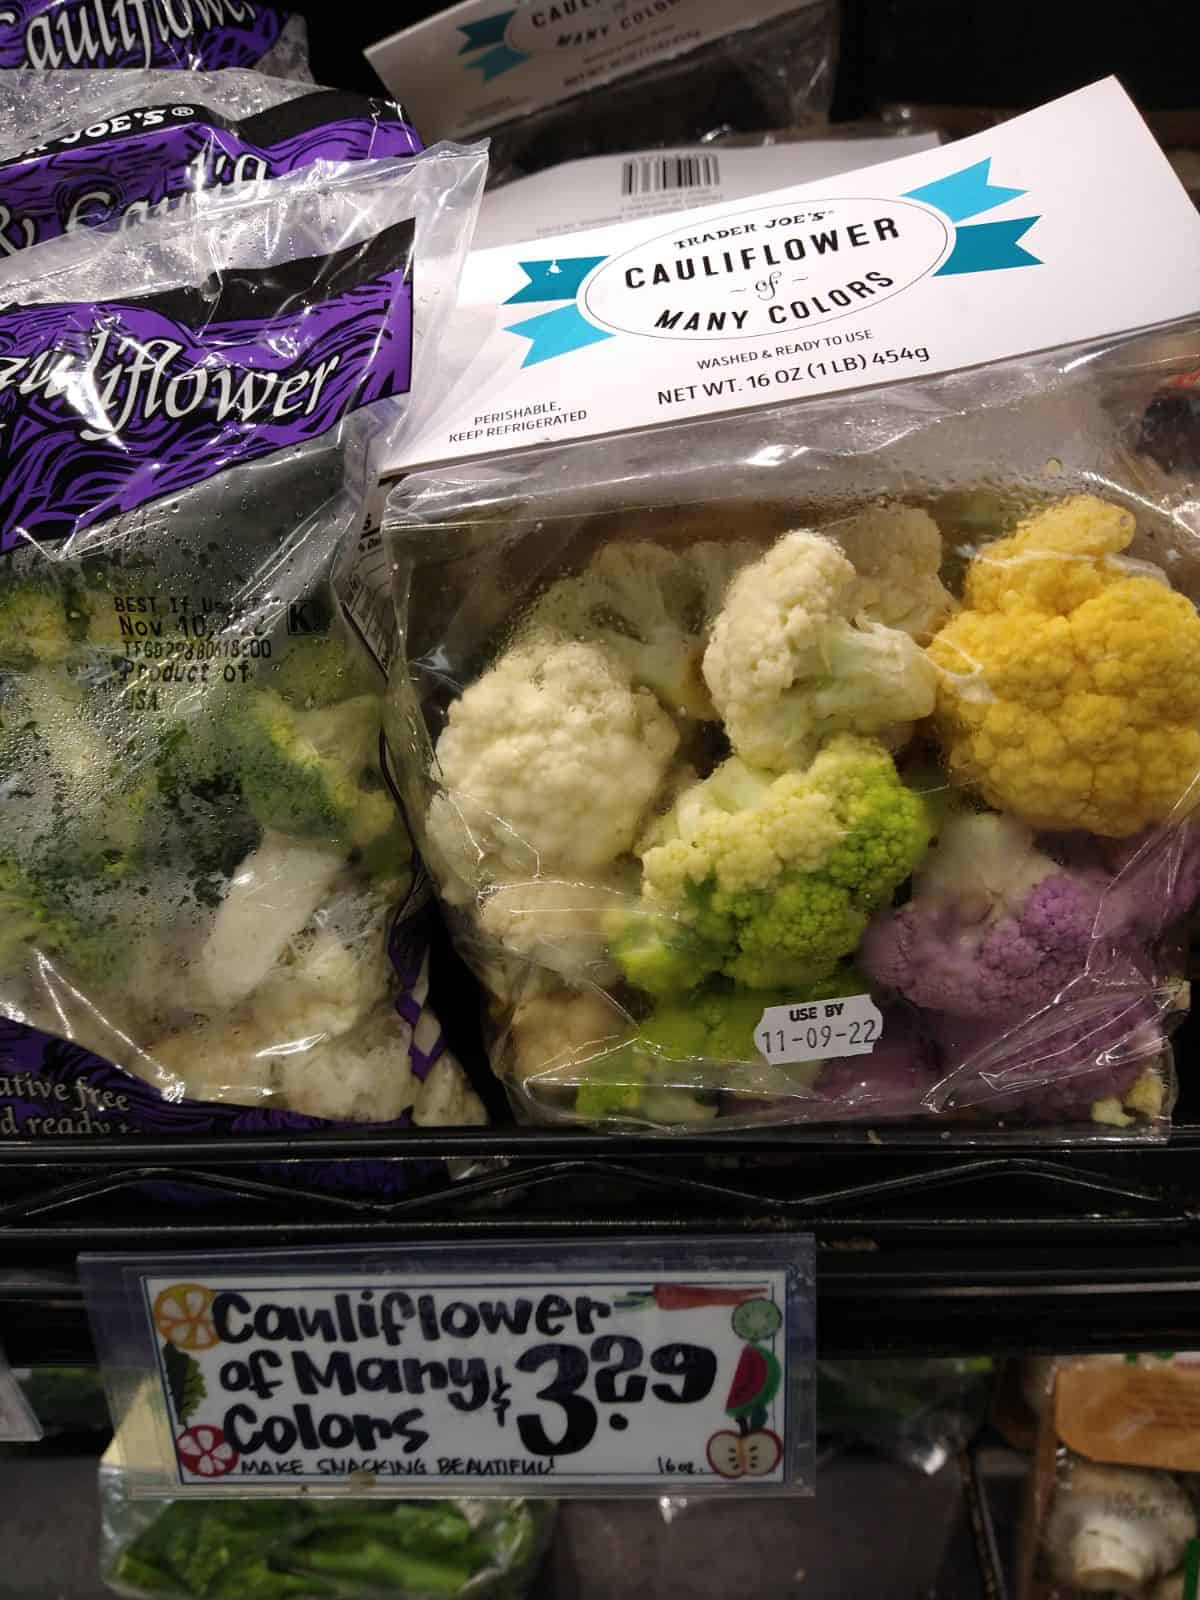 Bags of Cauliflower of Many Colors at a Trader Joe's store.